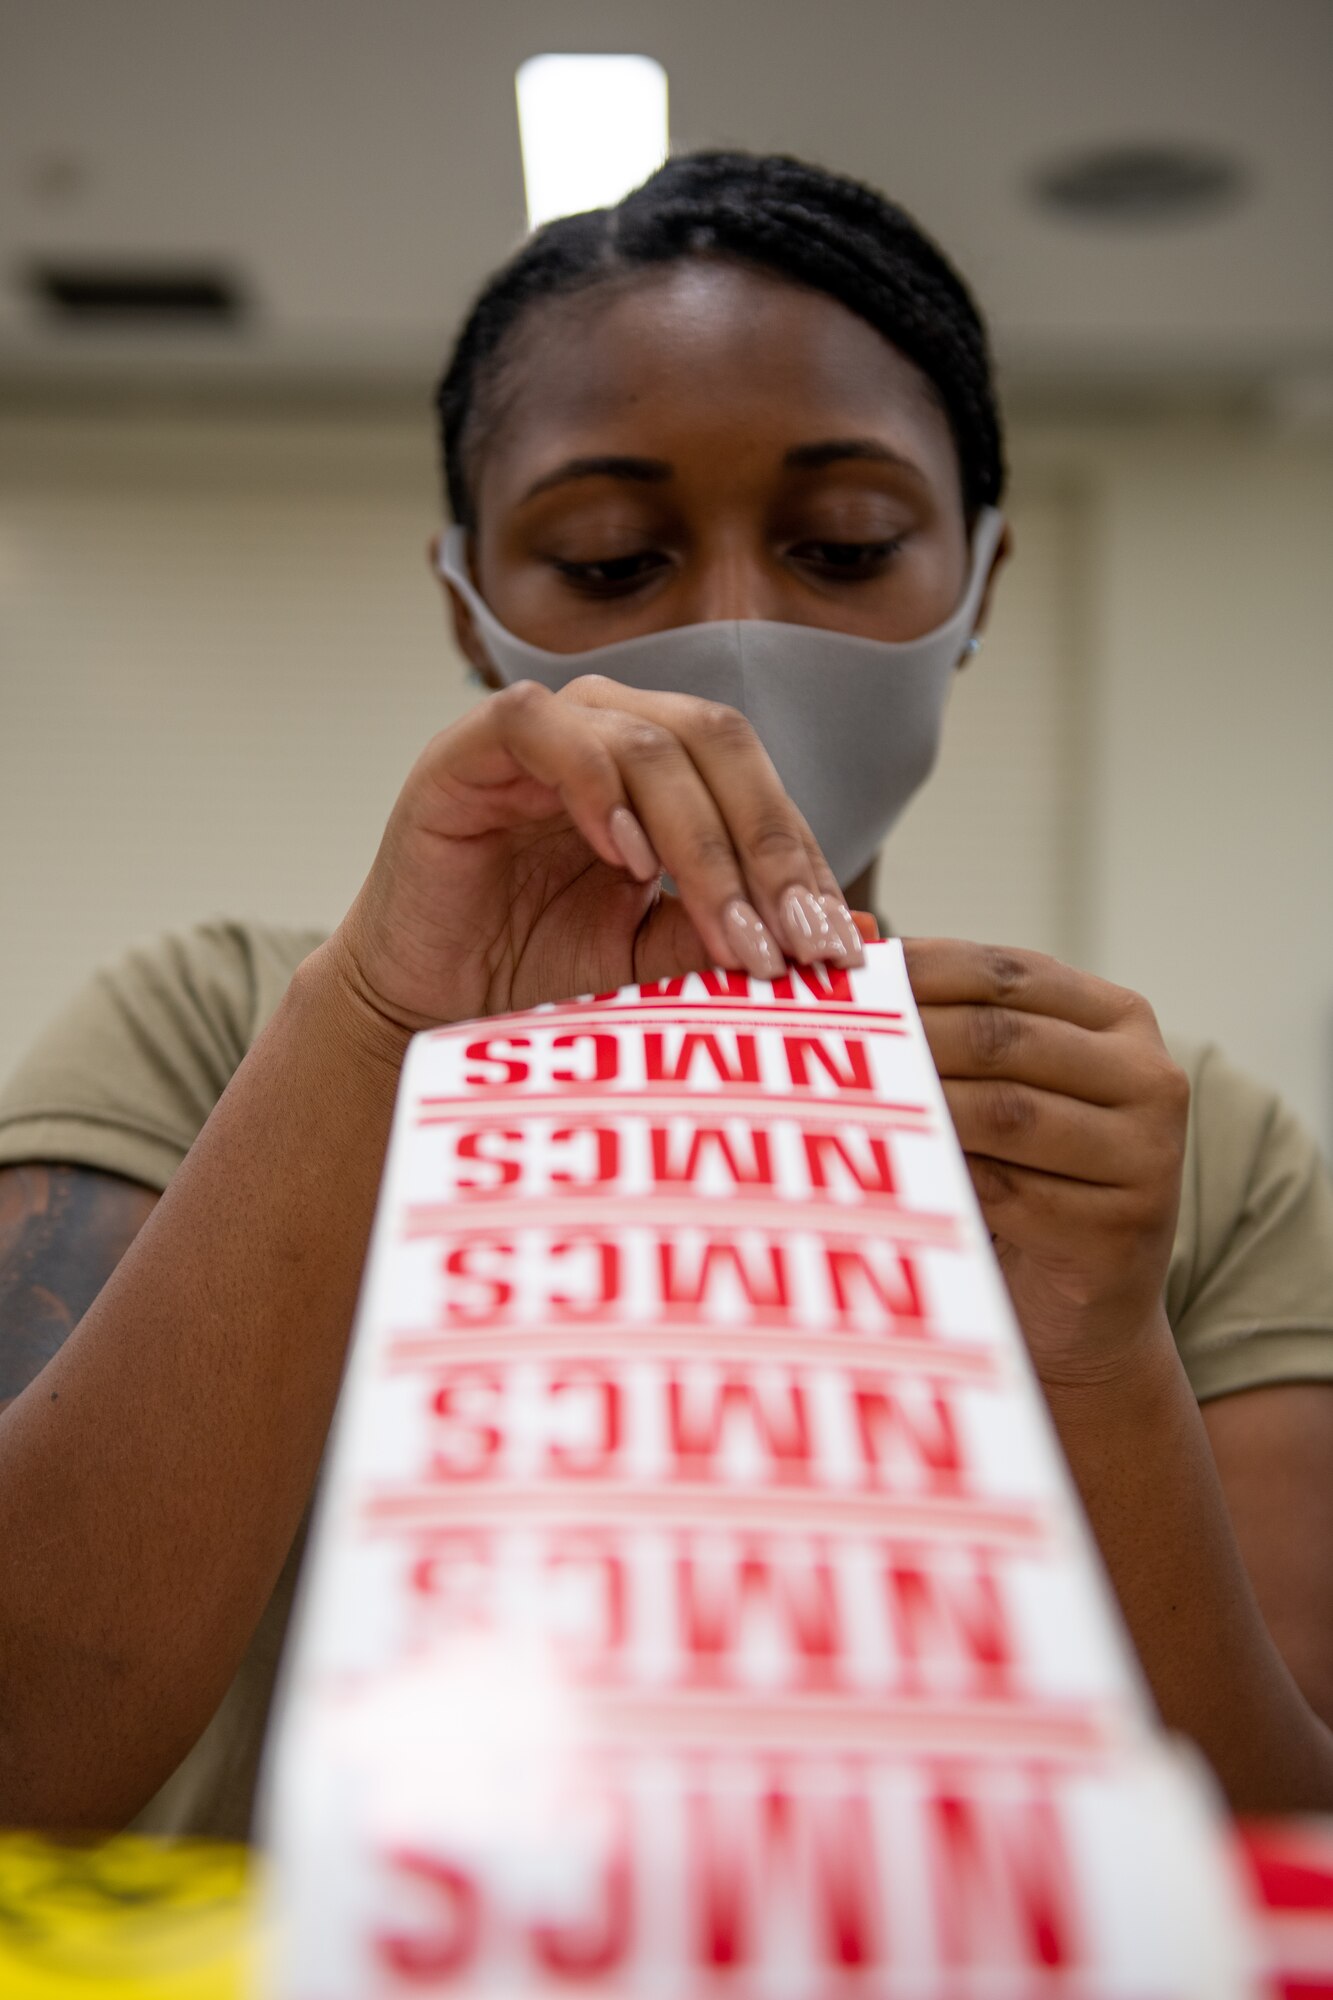 An Airman peels off a sticker from a roll of stickers